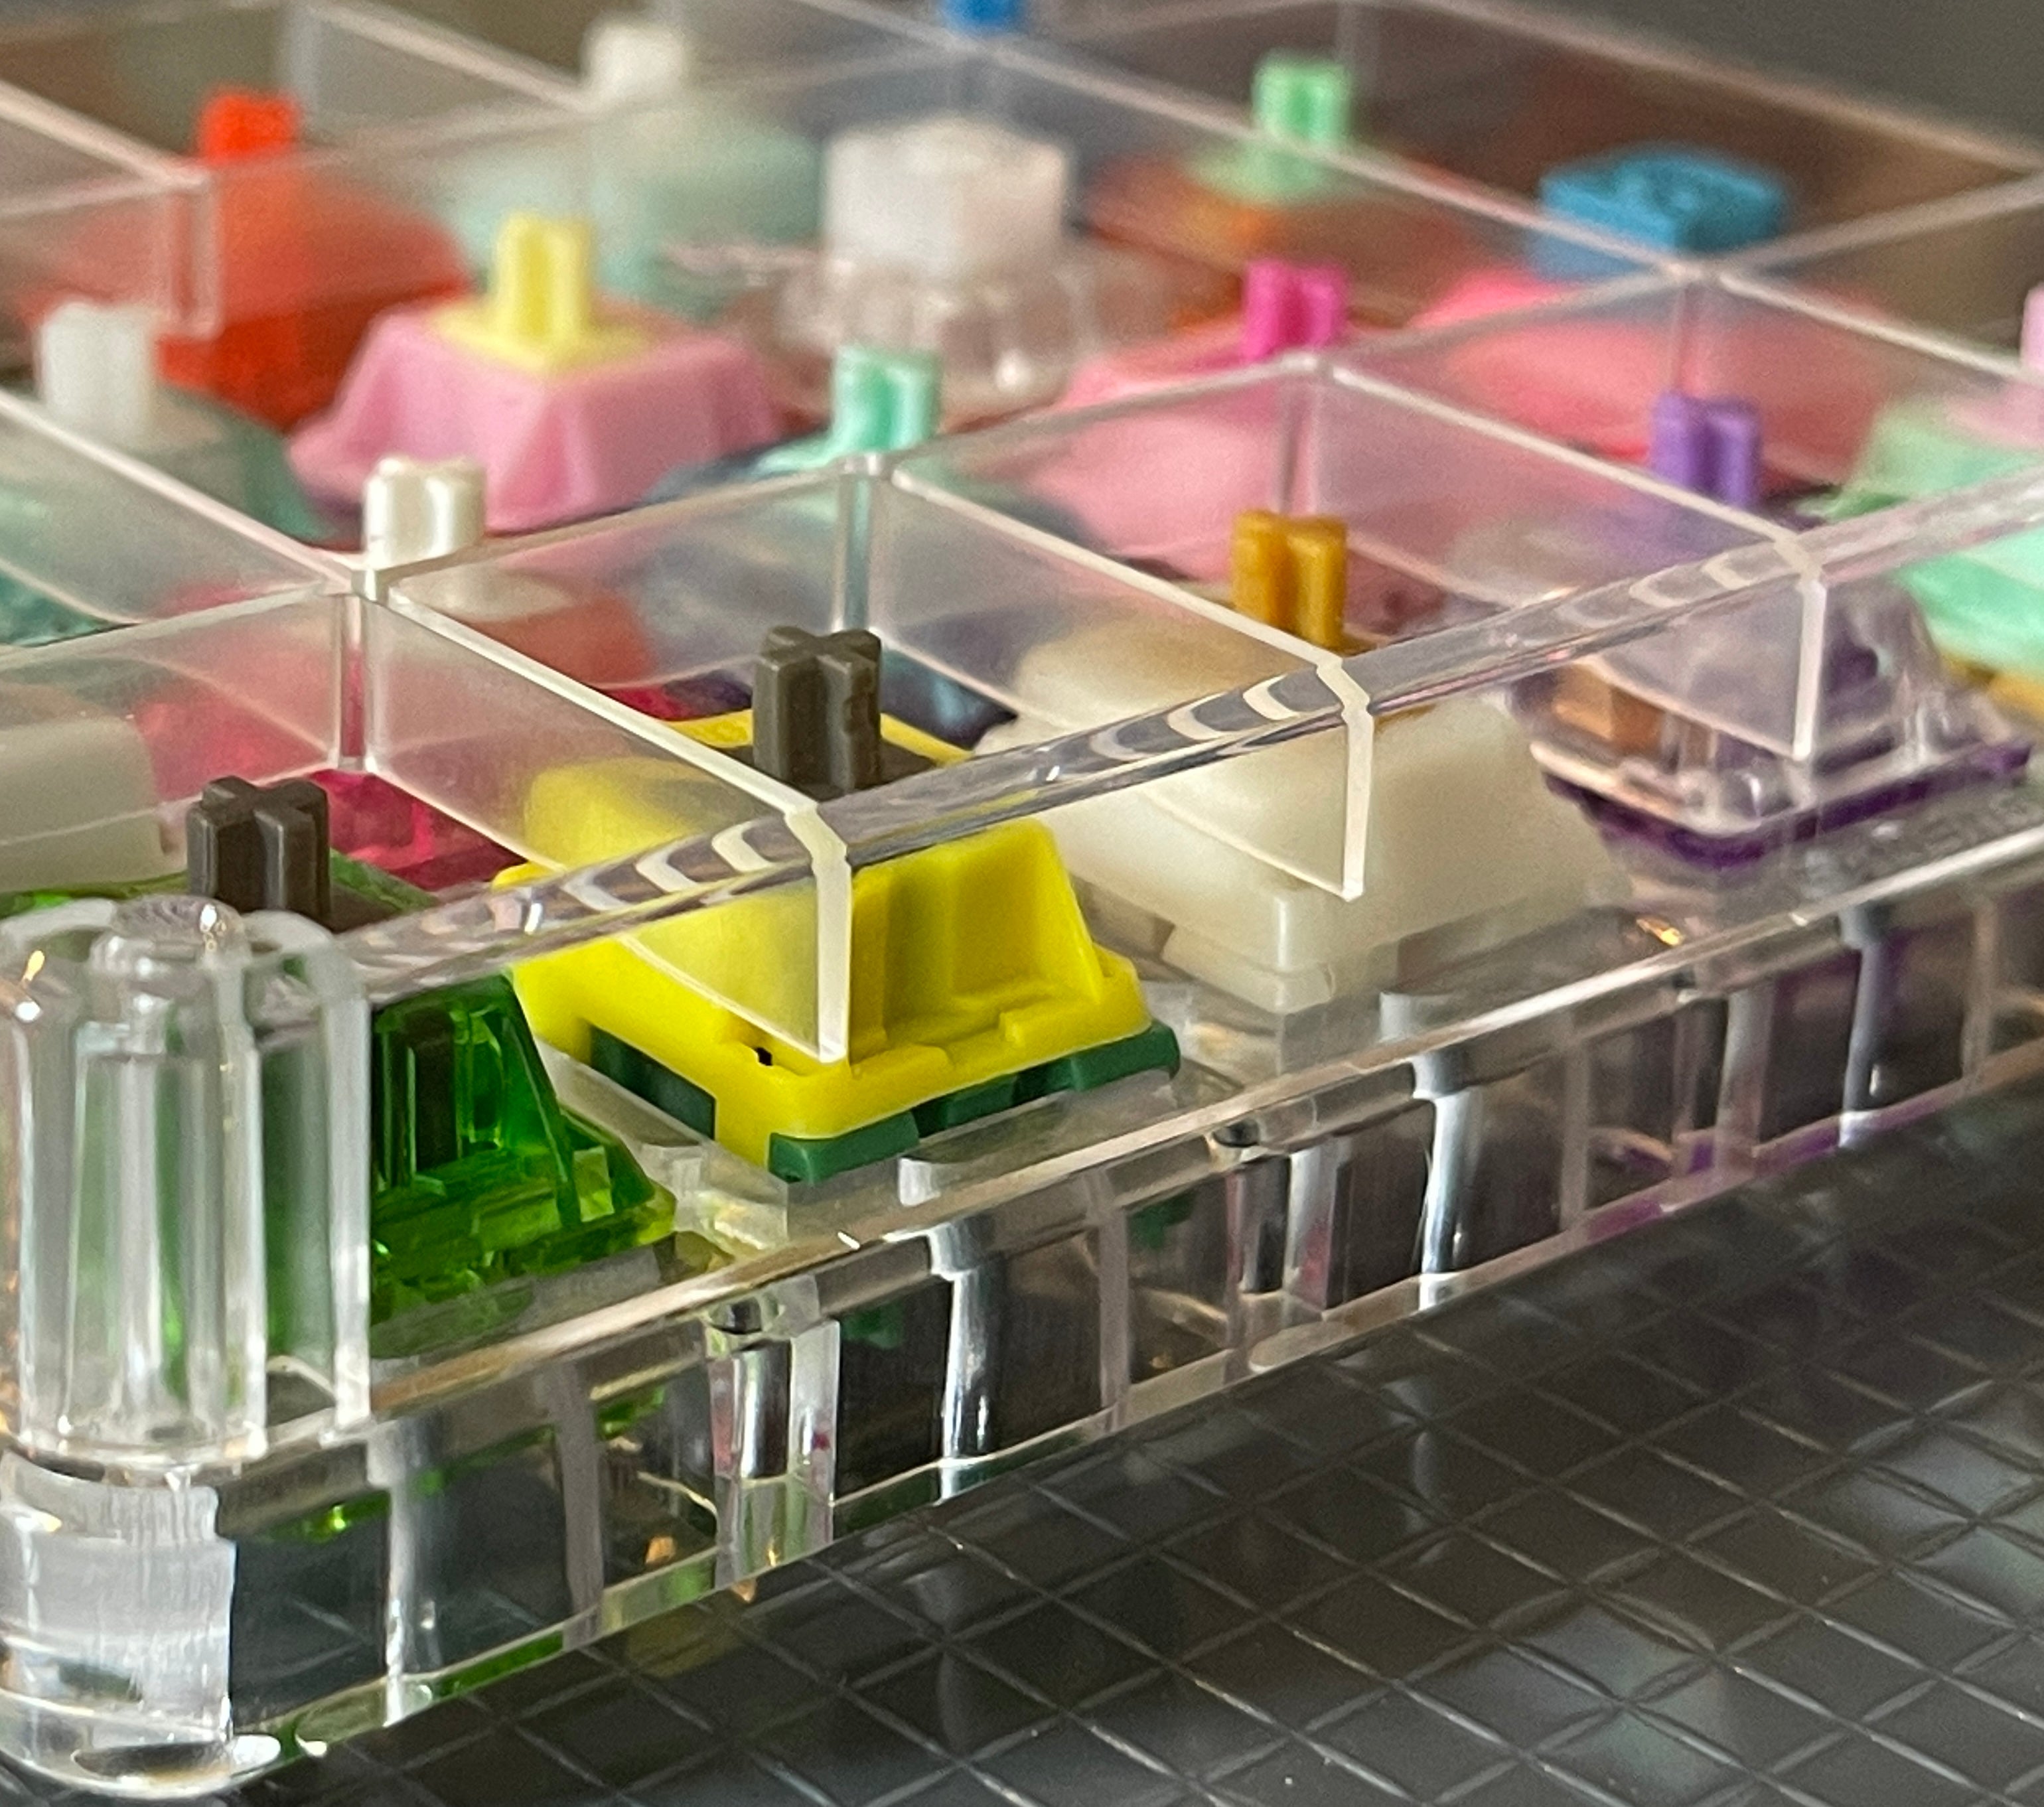 Gateron 20 Switch Sampler with Acrylic case